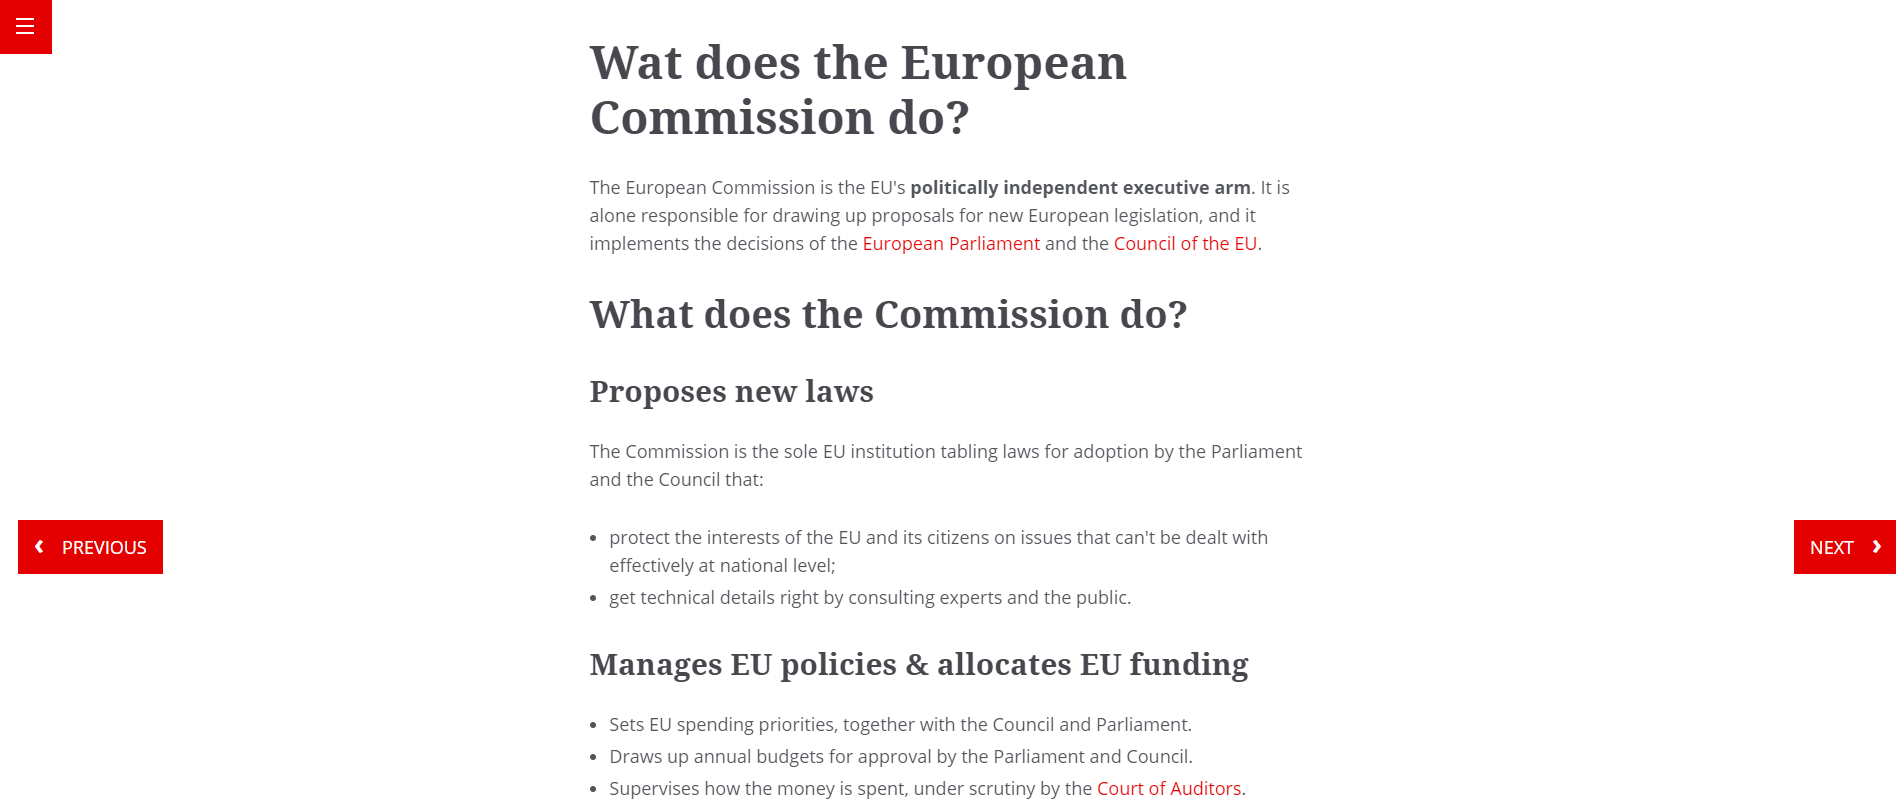 Easy LMS Software - A content slide in a course about the European Commission.